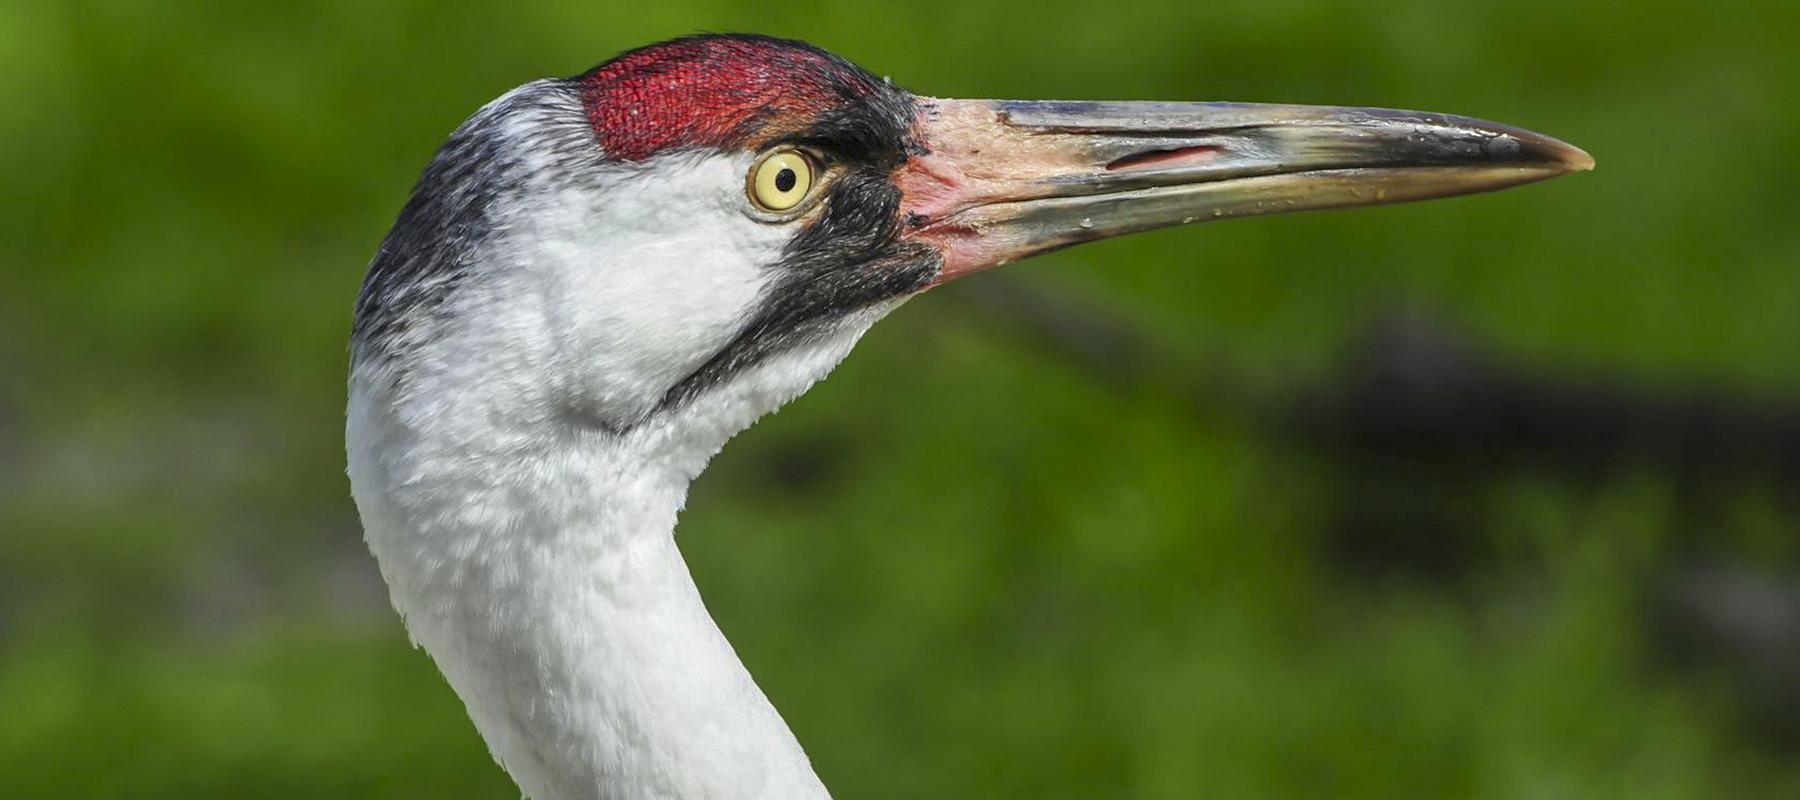 Image of a whooping crane